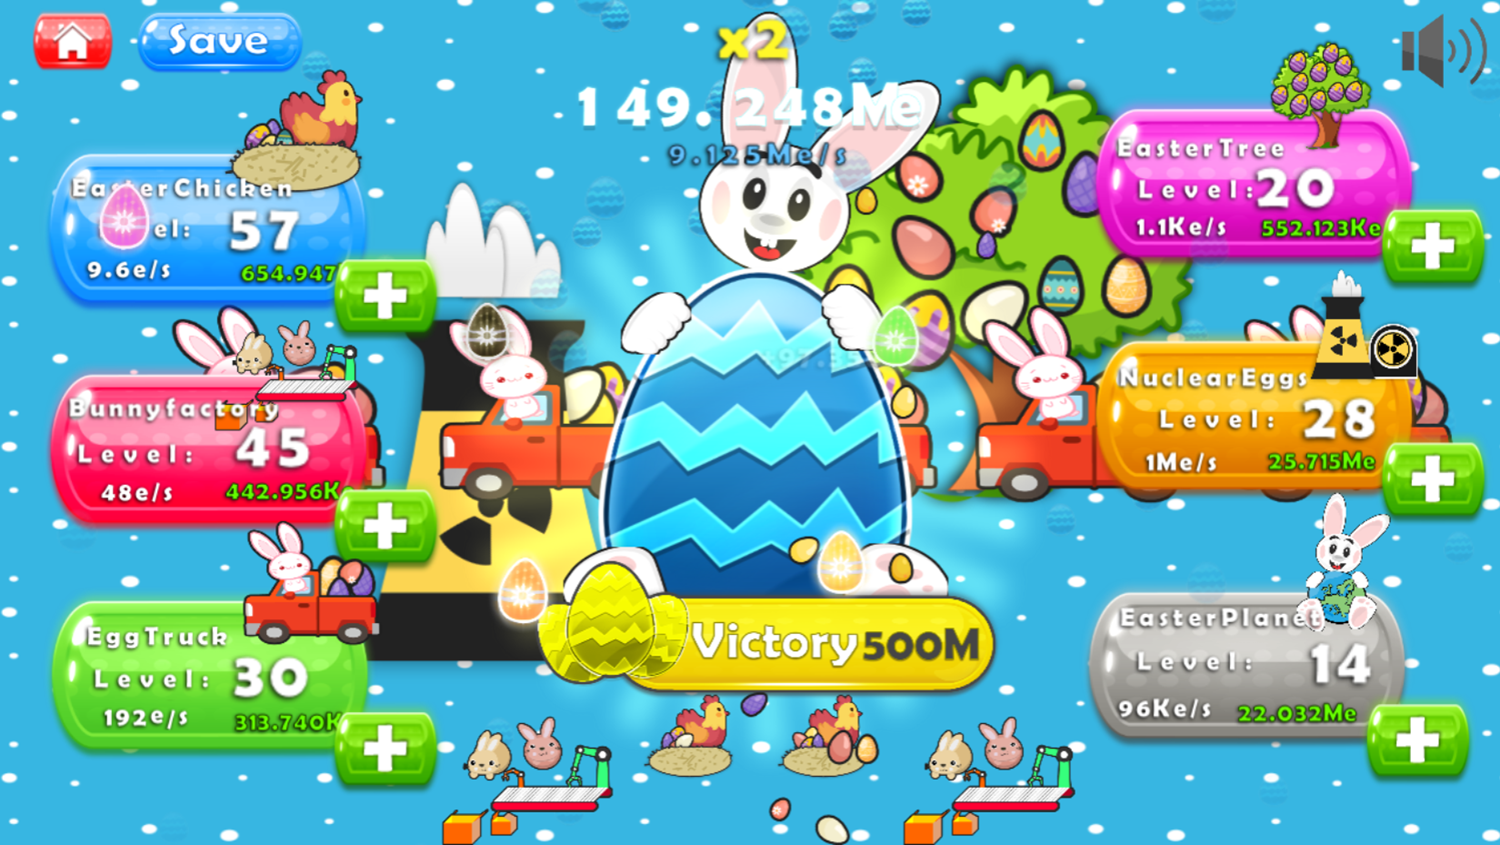 Easter Clicker Game Victory Button Shown Screenshot.